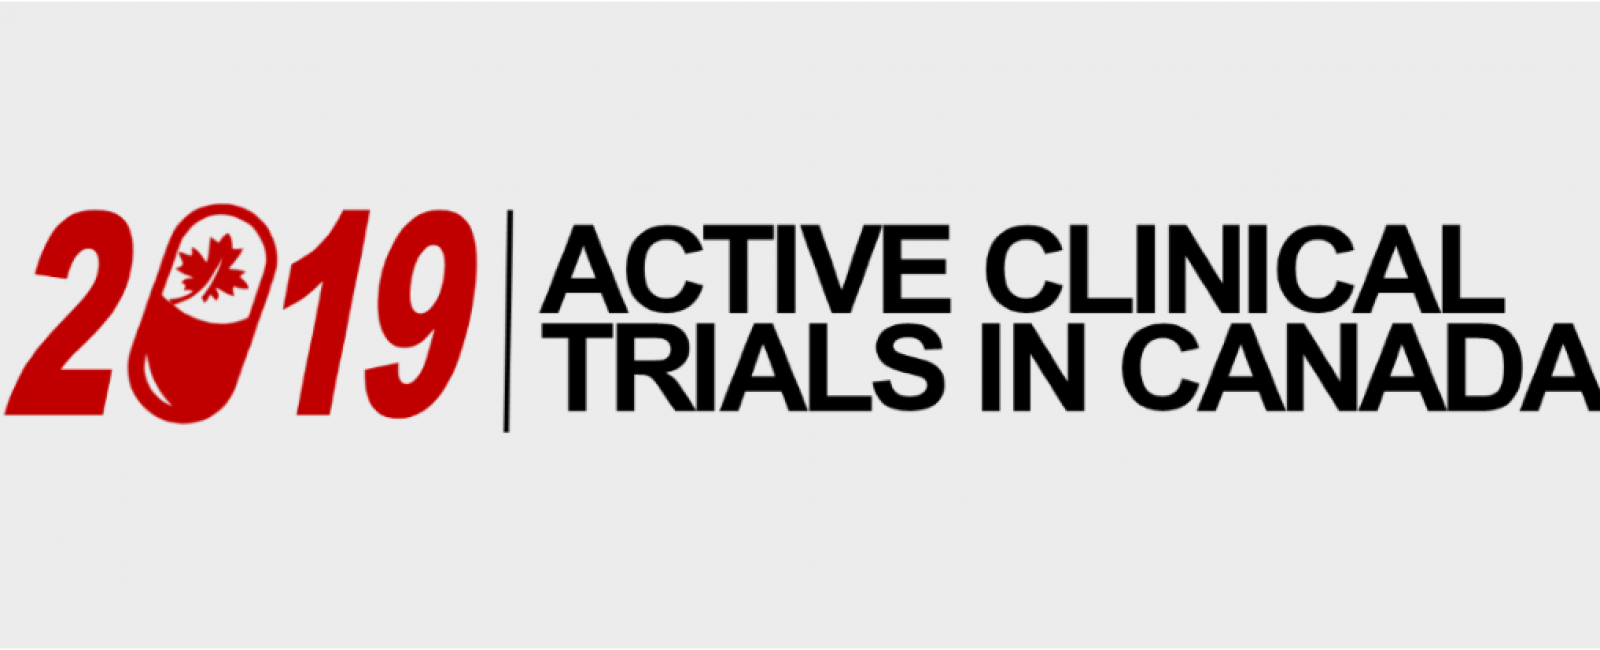 2019 Active Clinical Trials in Canada Infographic